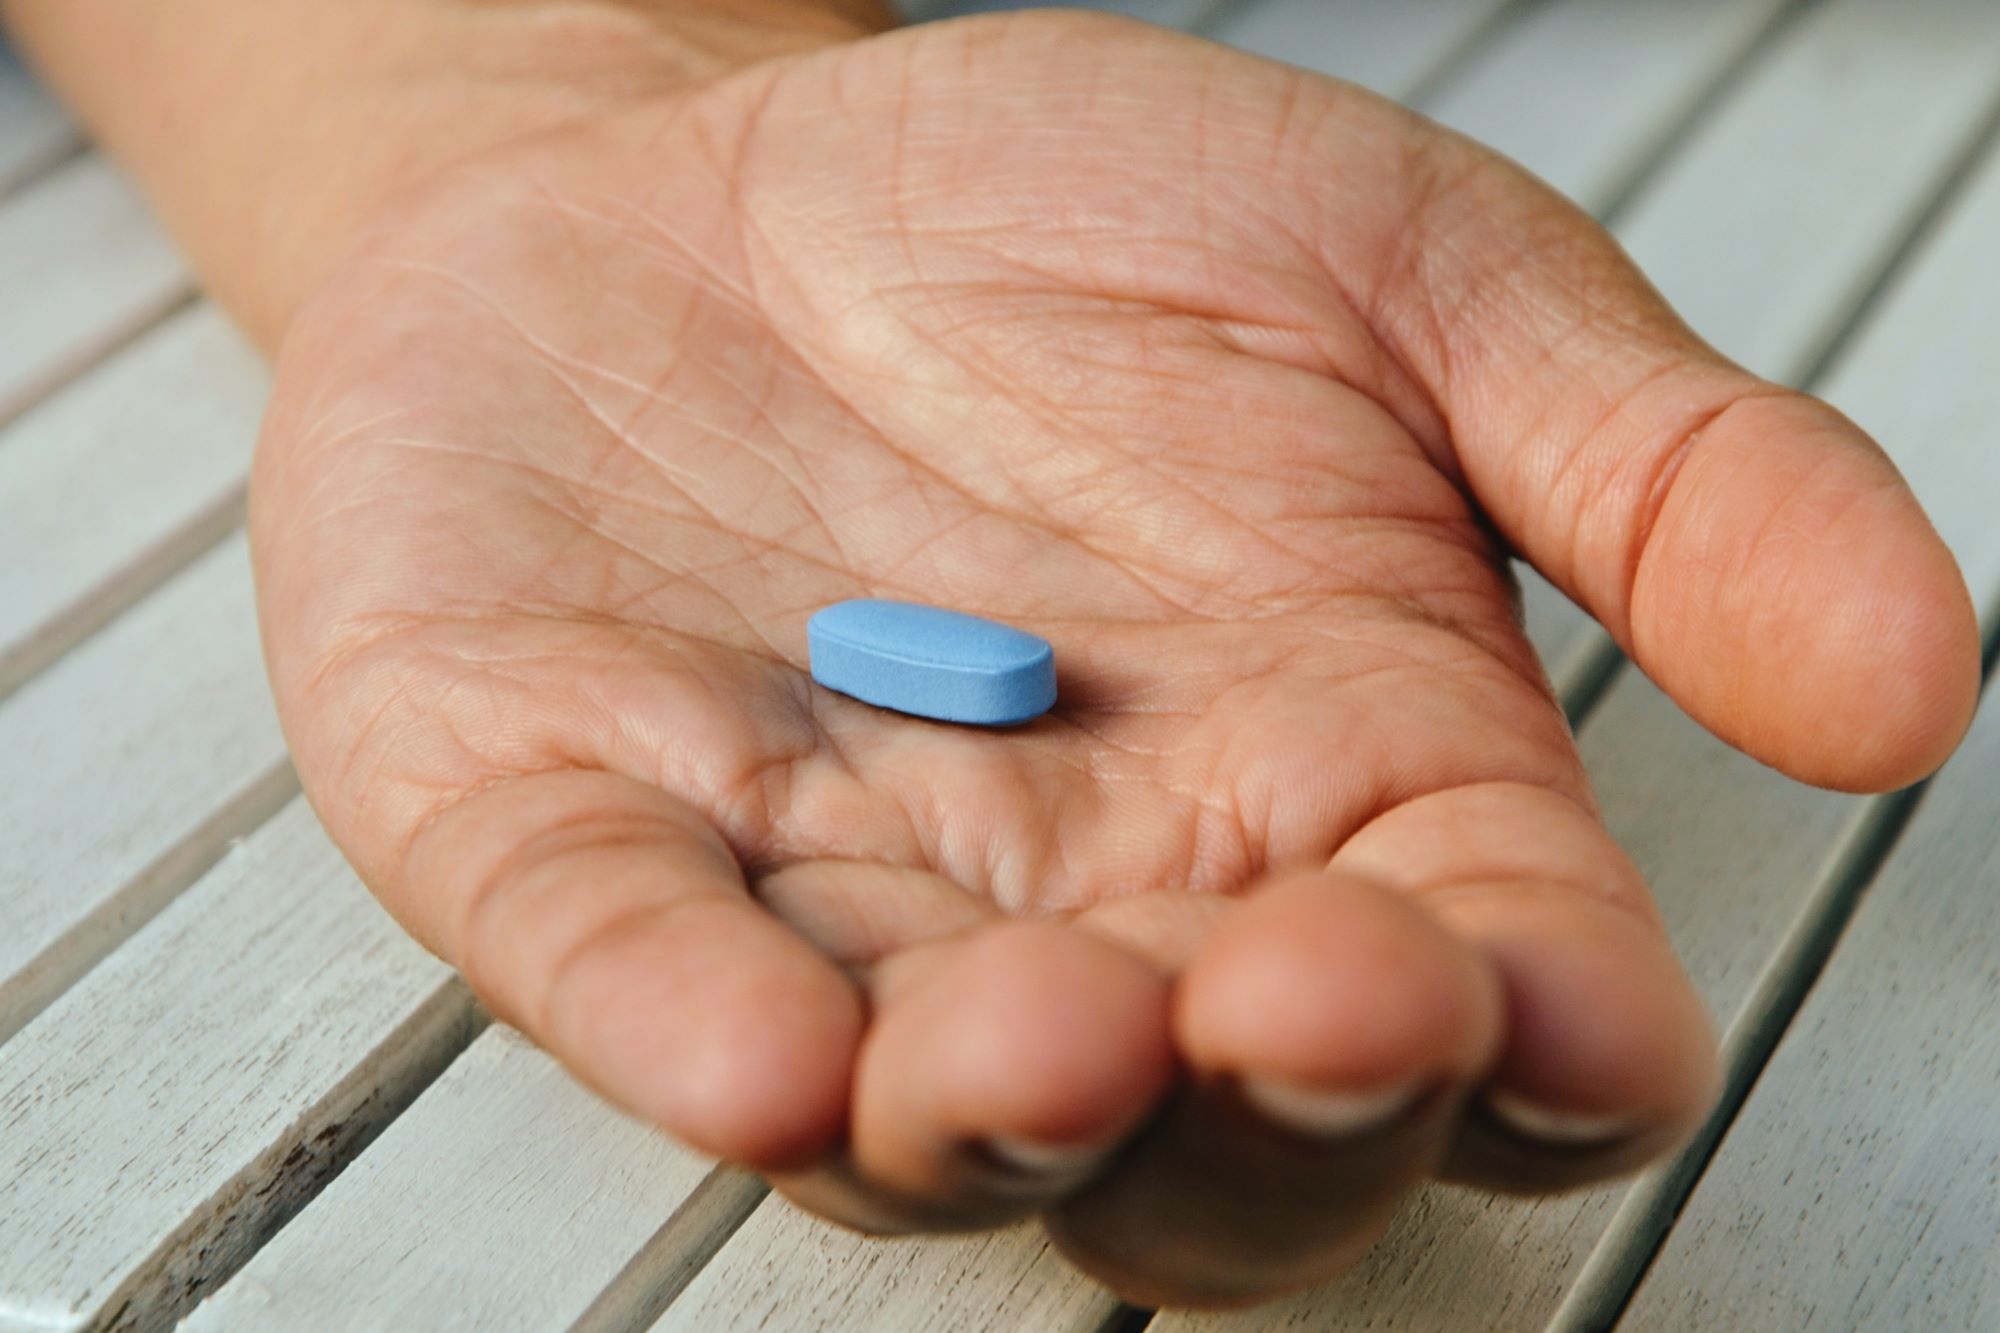 Are Viagra and Cialis Anti-Aging Agents? 2 New Studies Say Yes!